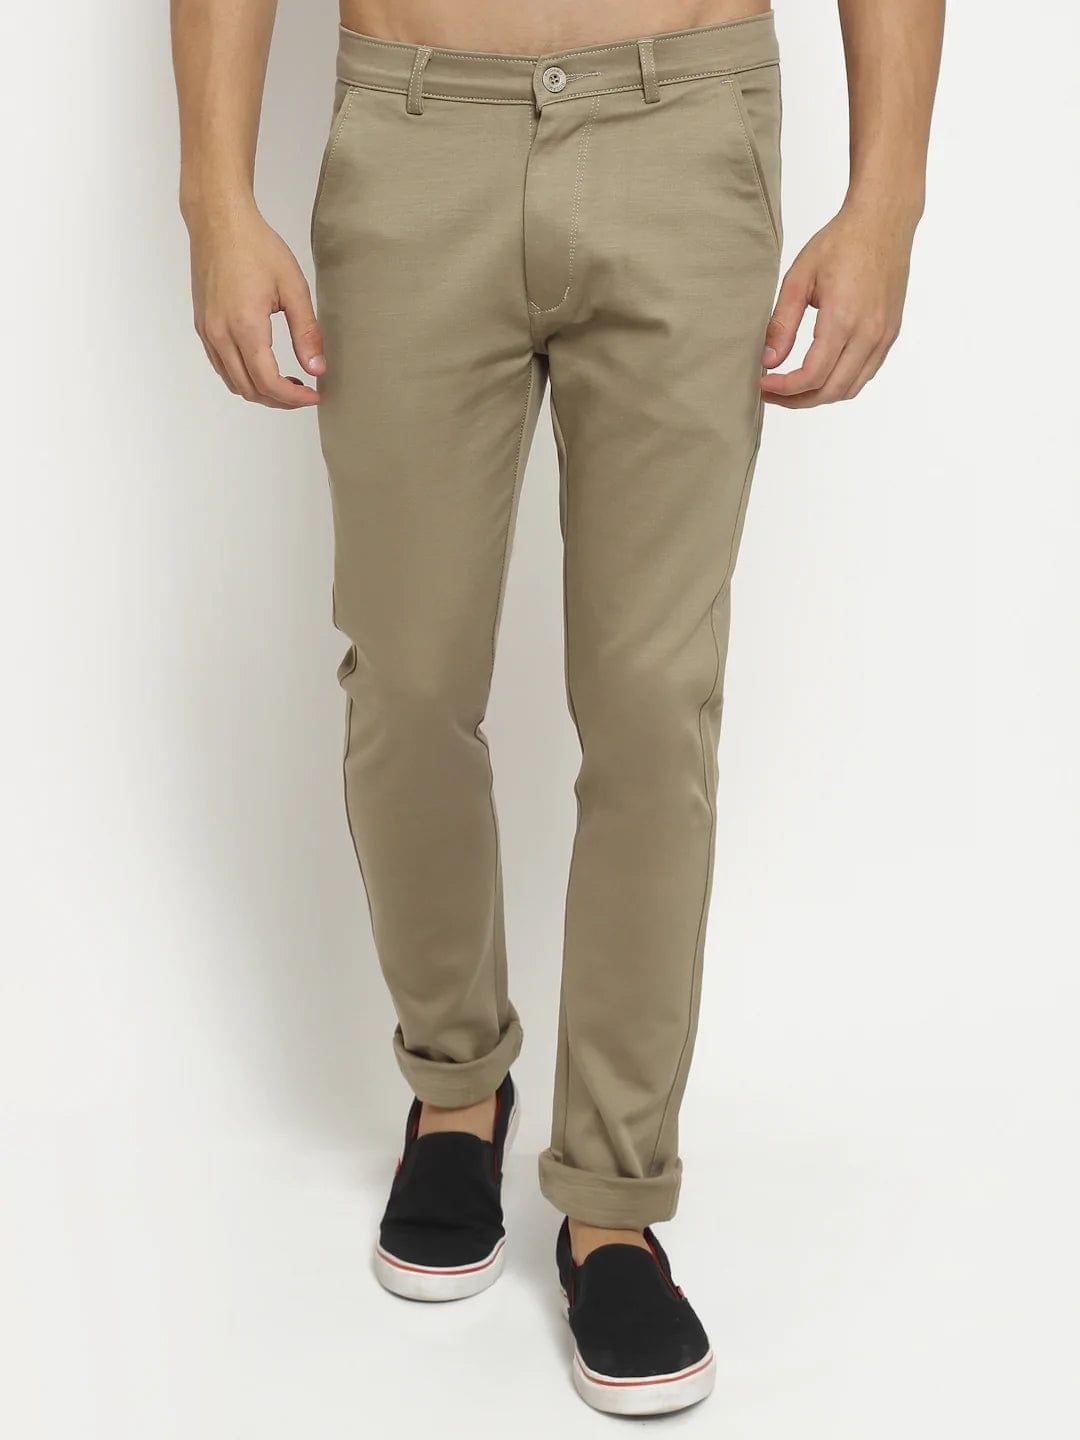 Men's Casual Twill Stretch Skinny Chino Pants Trousers Size 28-44 | eBay